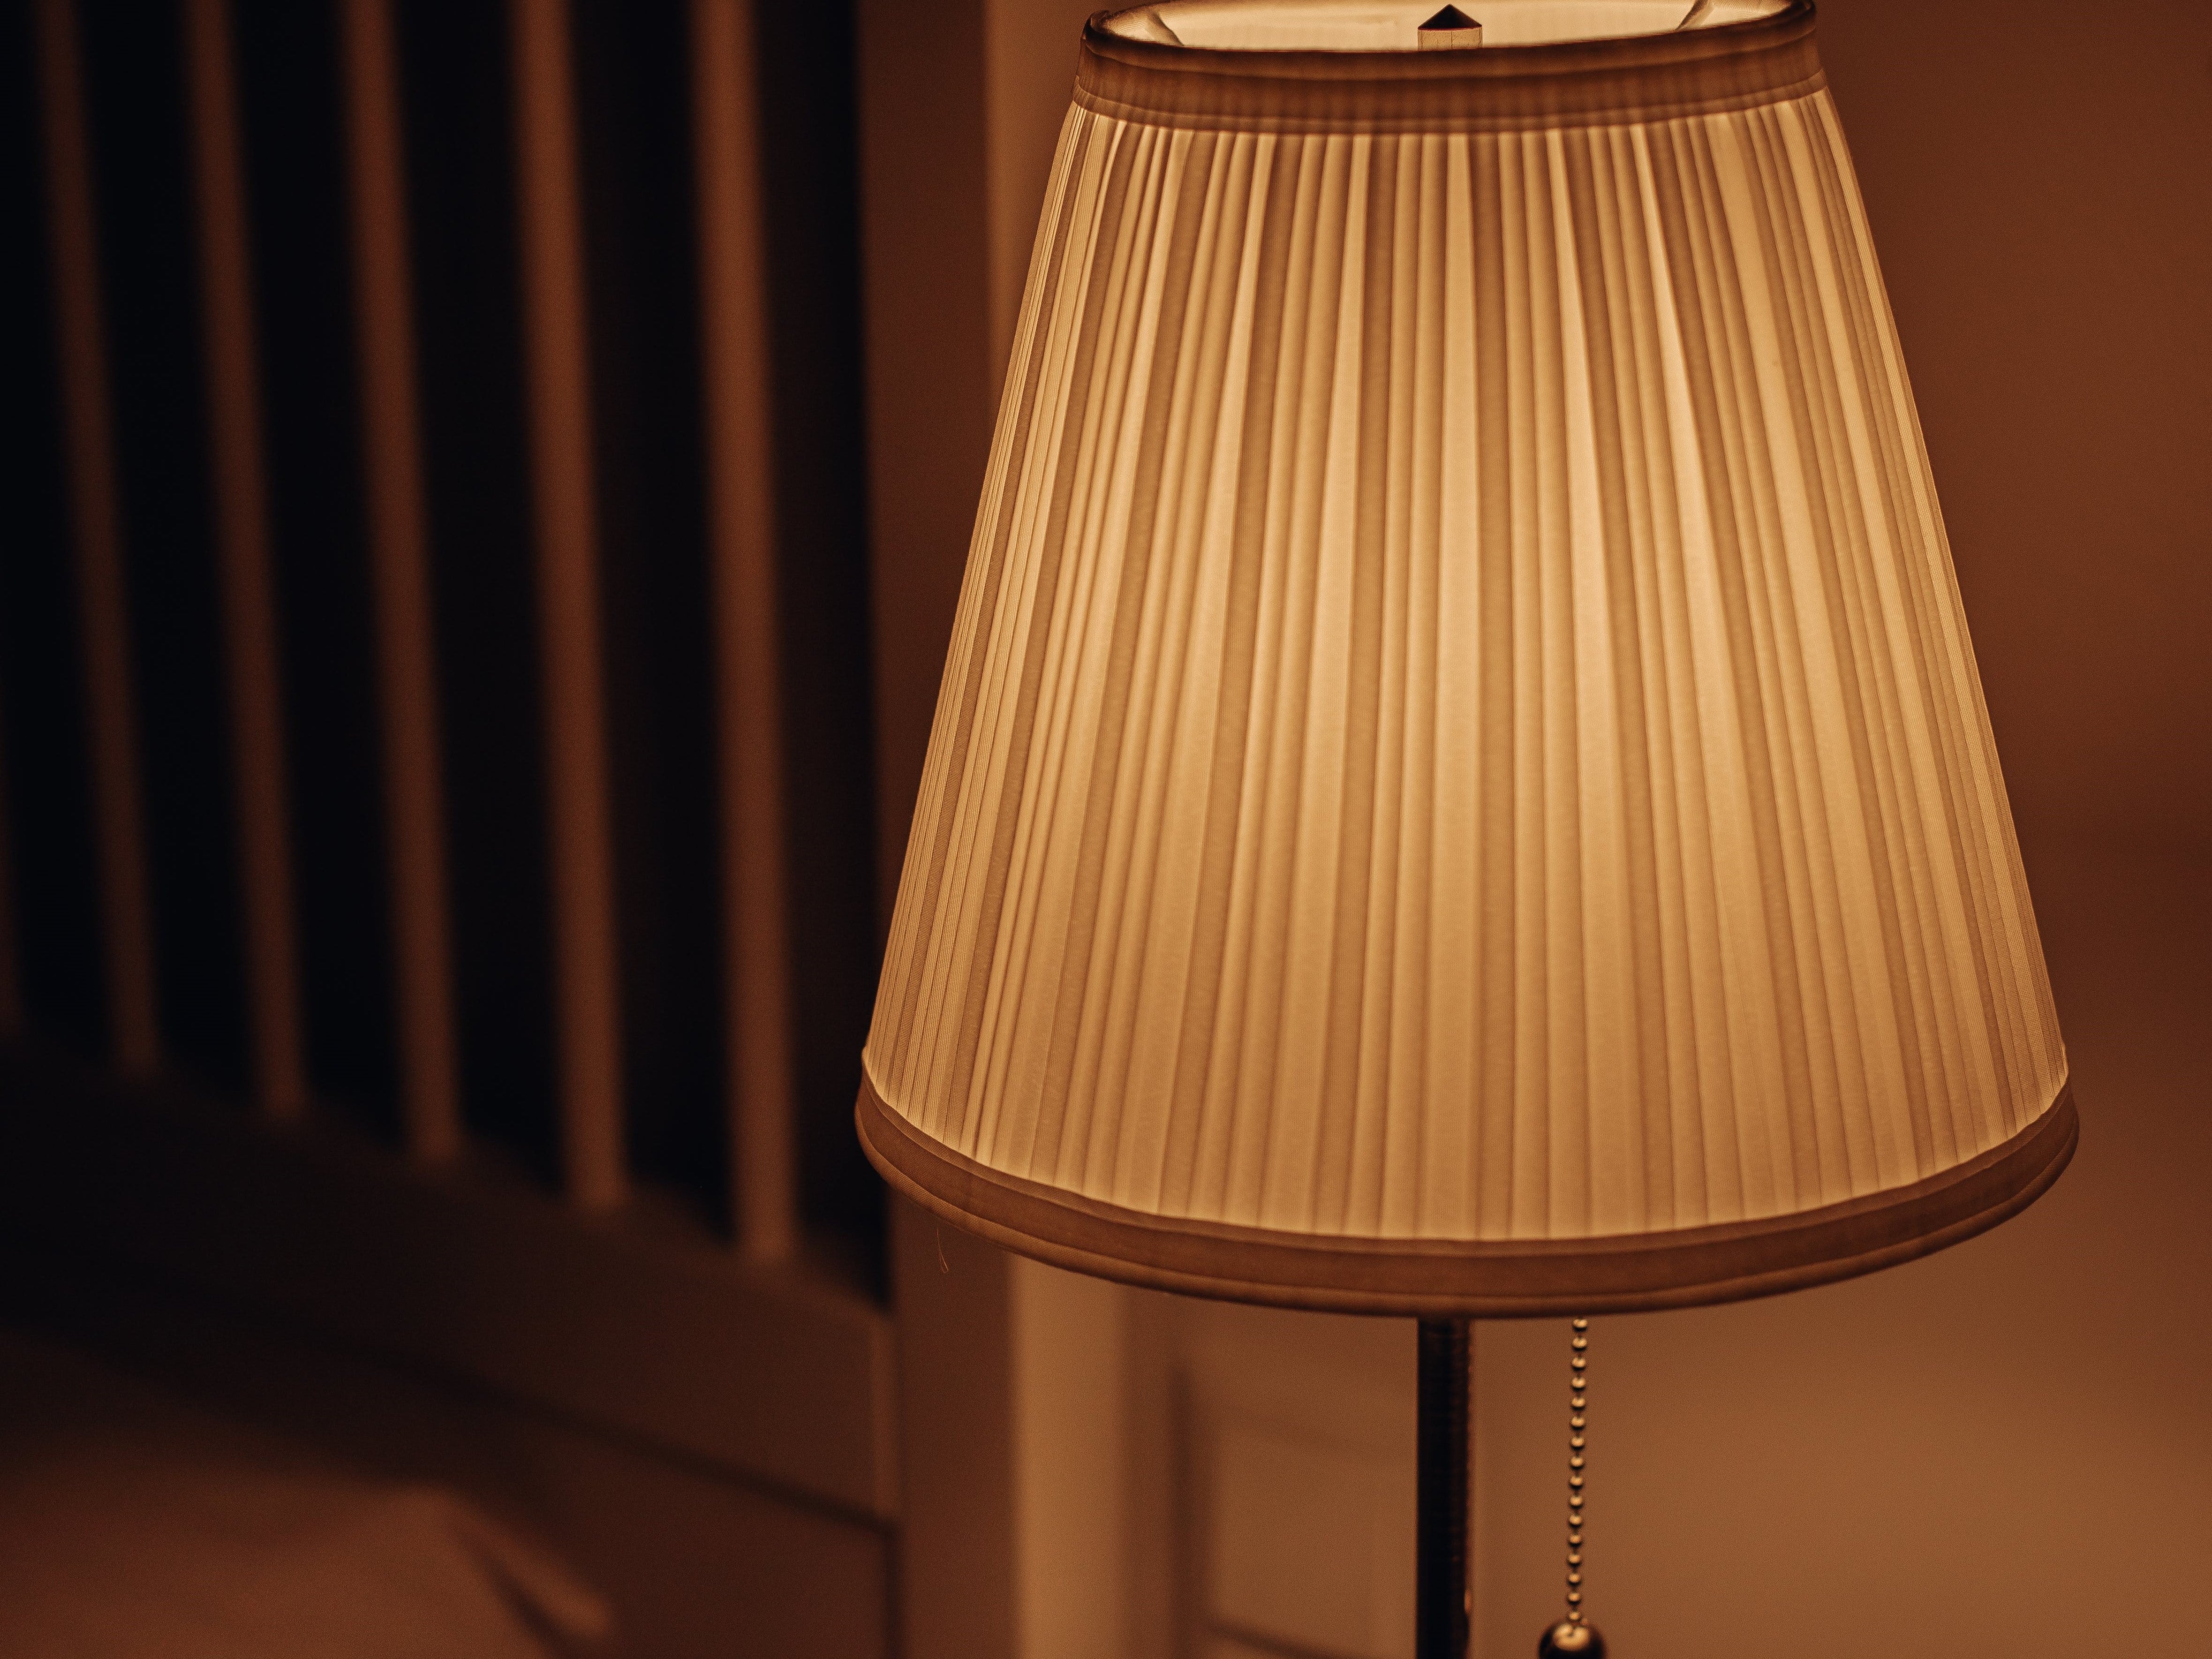 Why Consider the Best Floor Lamps for Dark Rooms?